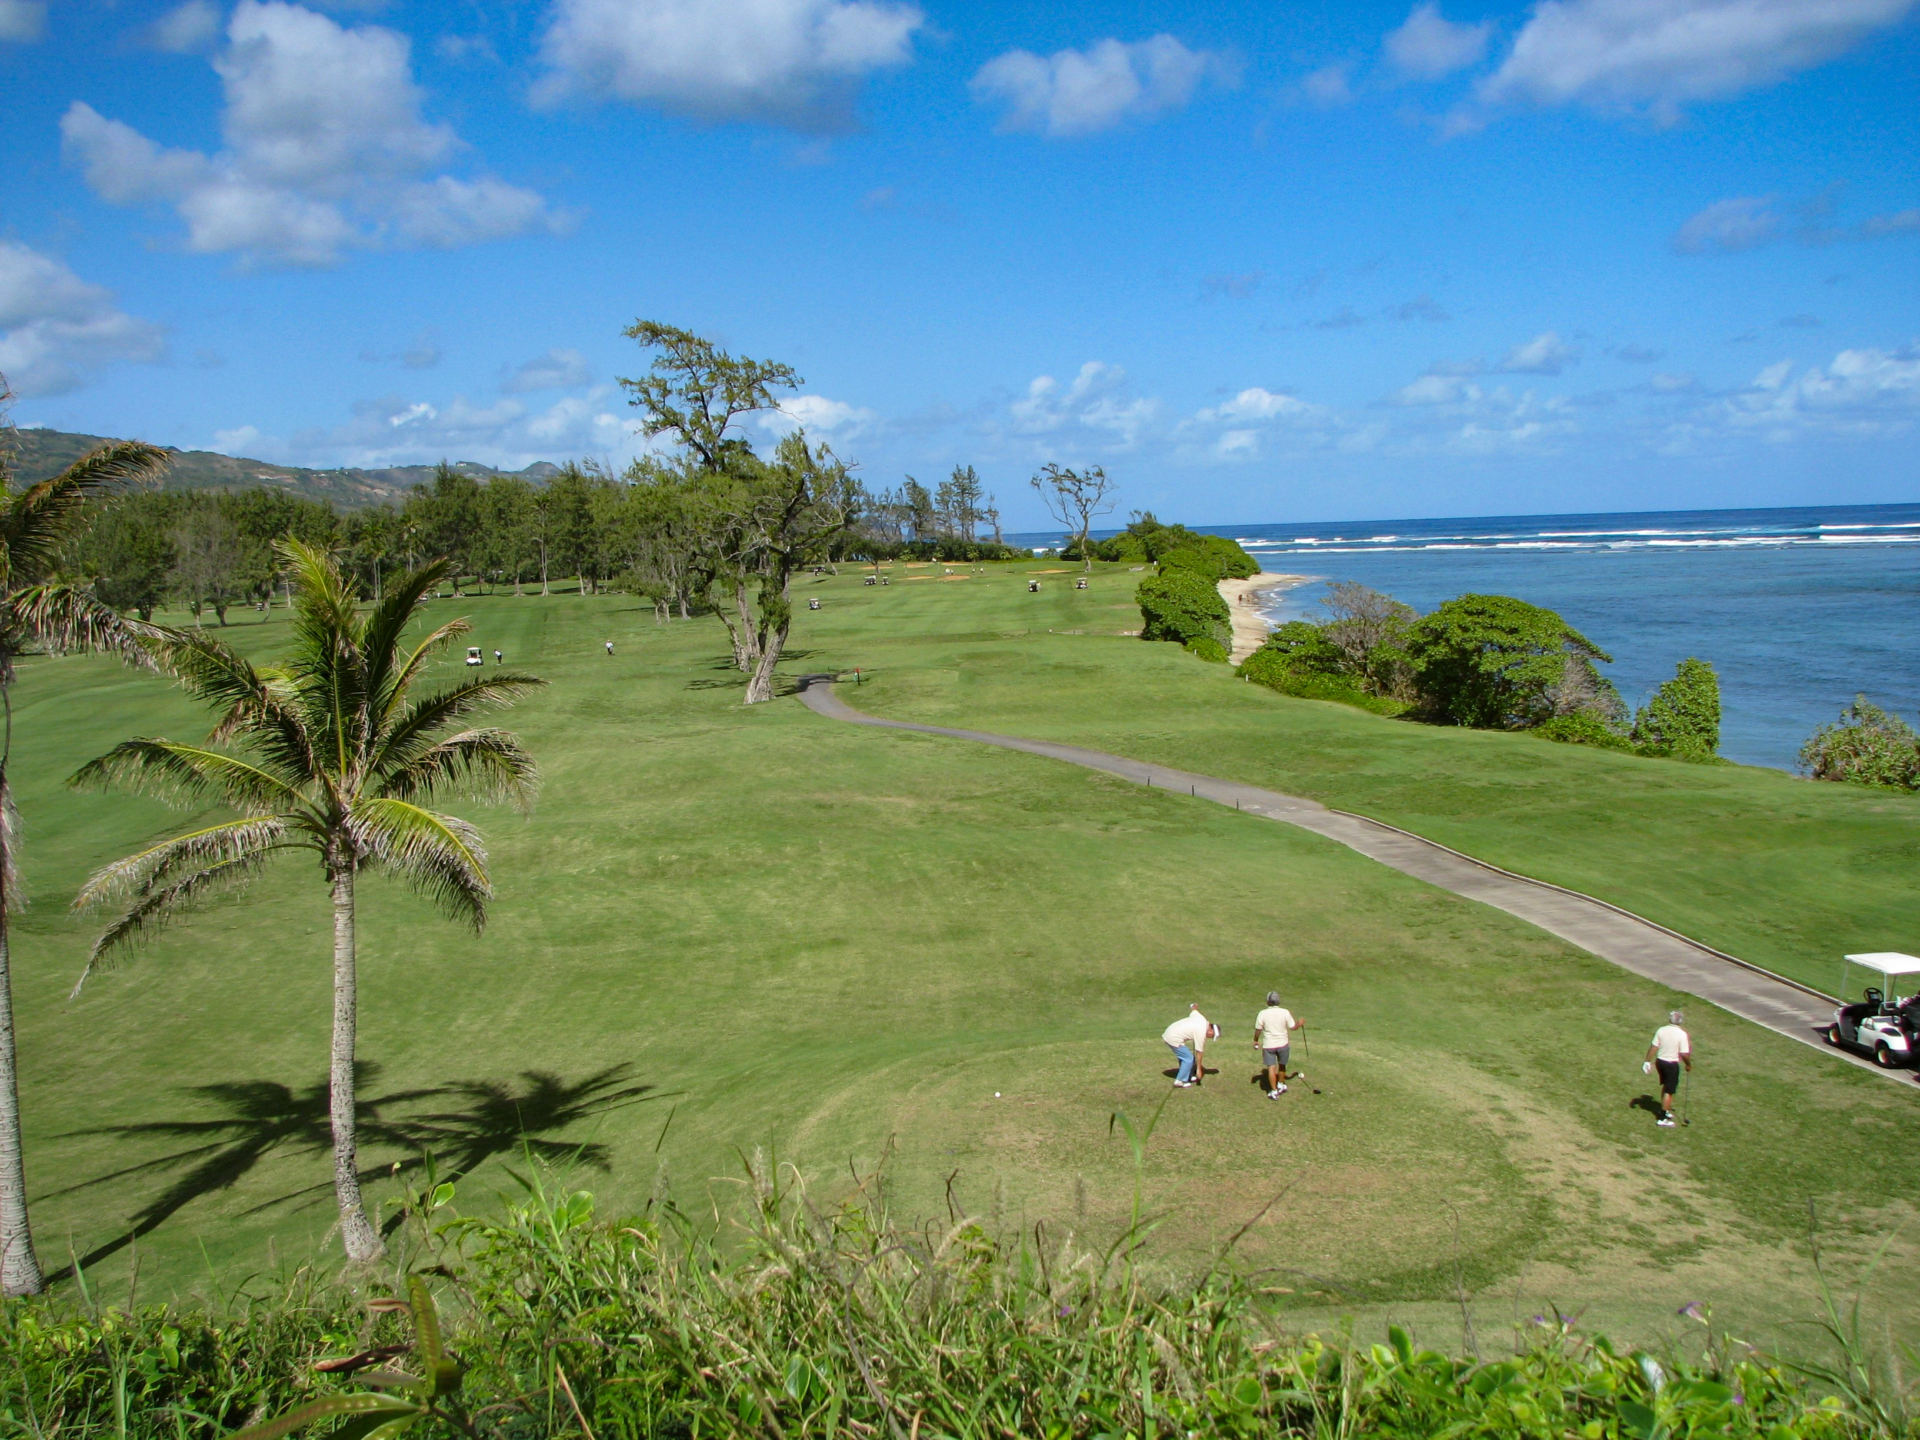 The Maui municipal golf course at Waiehu, just north of Wailuku. It's one of the best golf deals in Hawai'i. JIM BYERS PHOTO 